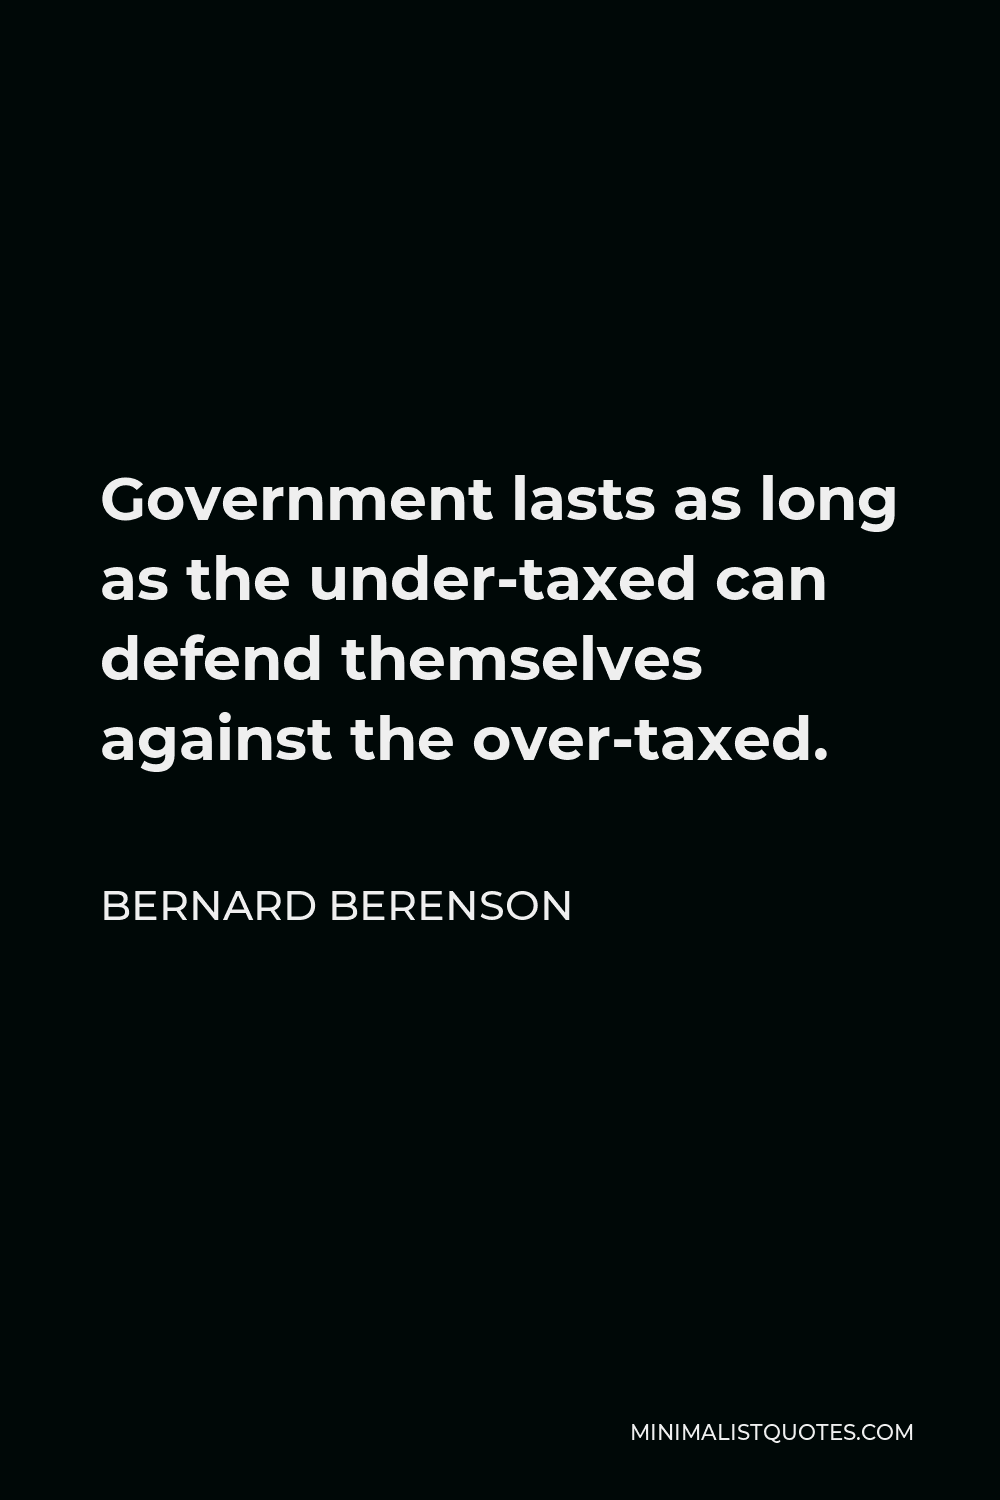 Bernard Berenson Quote - Government lasts as long as the under-taxed can defend themselves against the over-taxed.